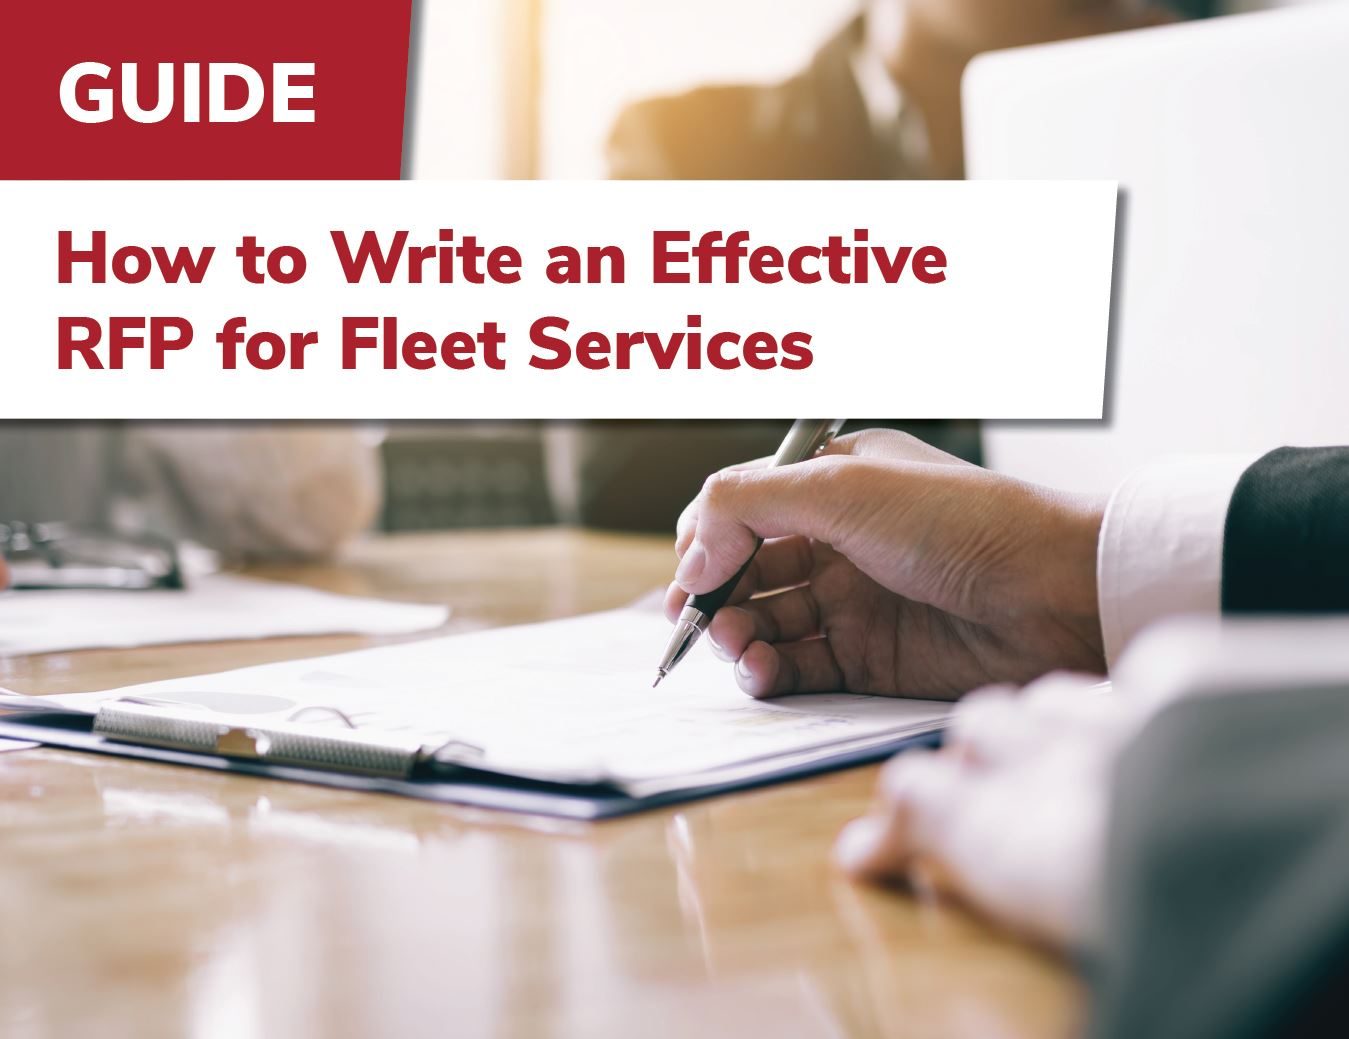 How to Write an Effective RFP for Fleet Services